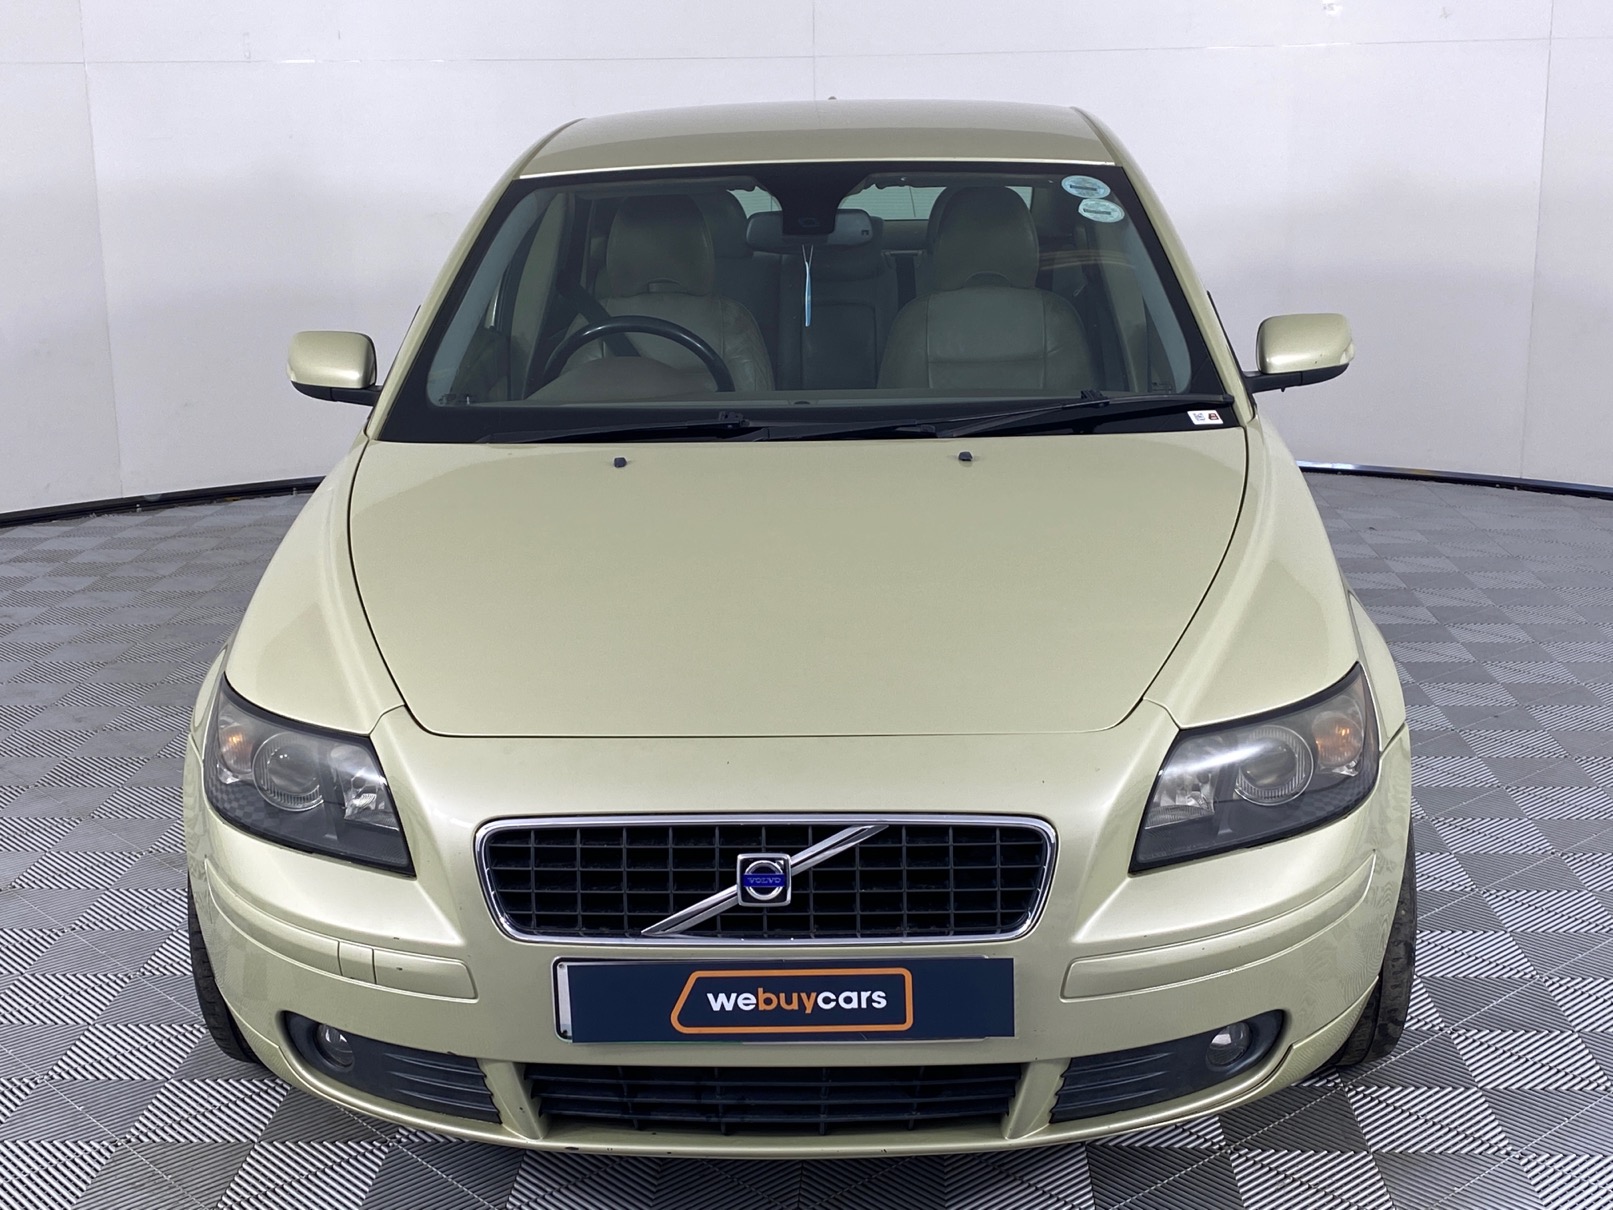 Used 2005 Volvo S40 2.0d for sale WeBuyCars